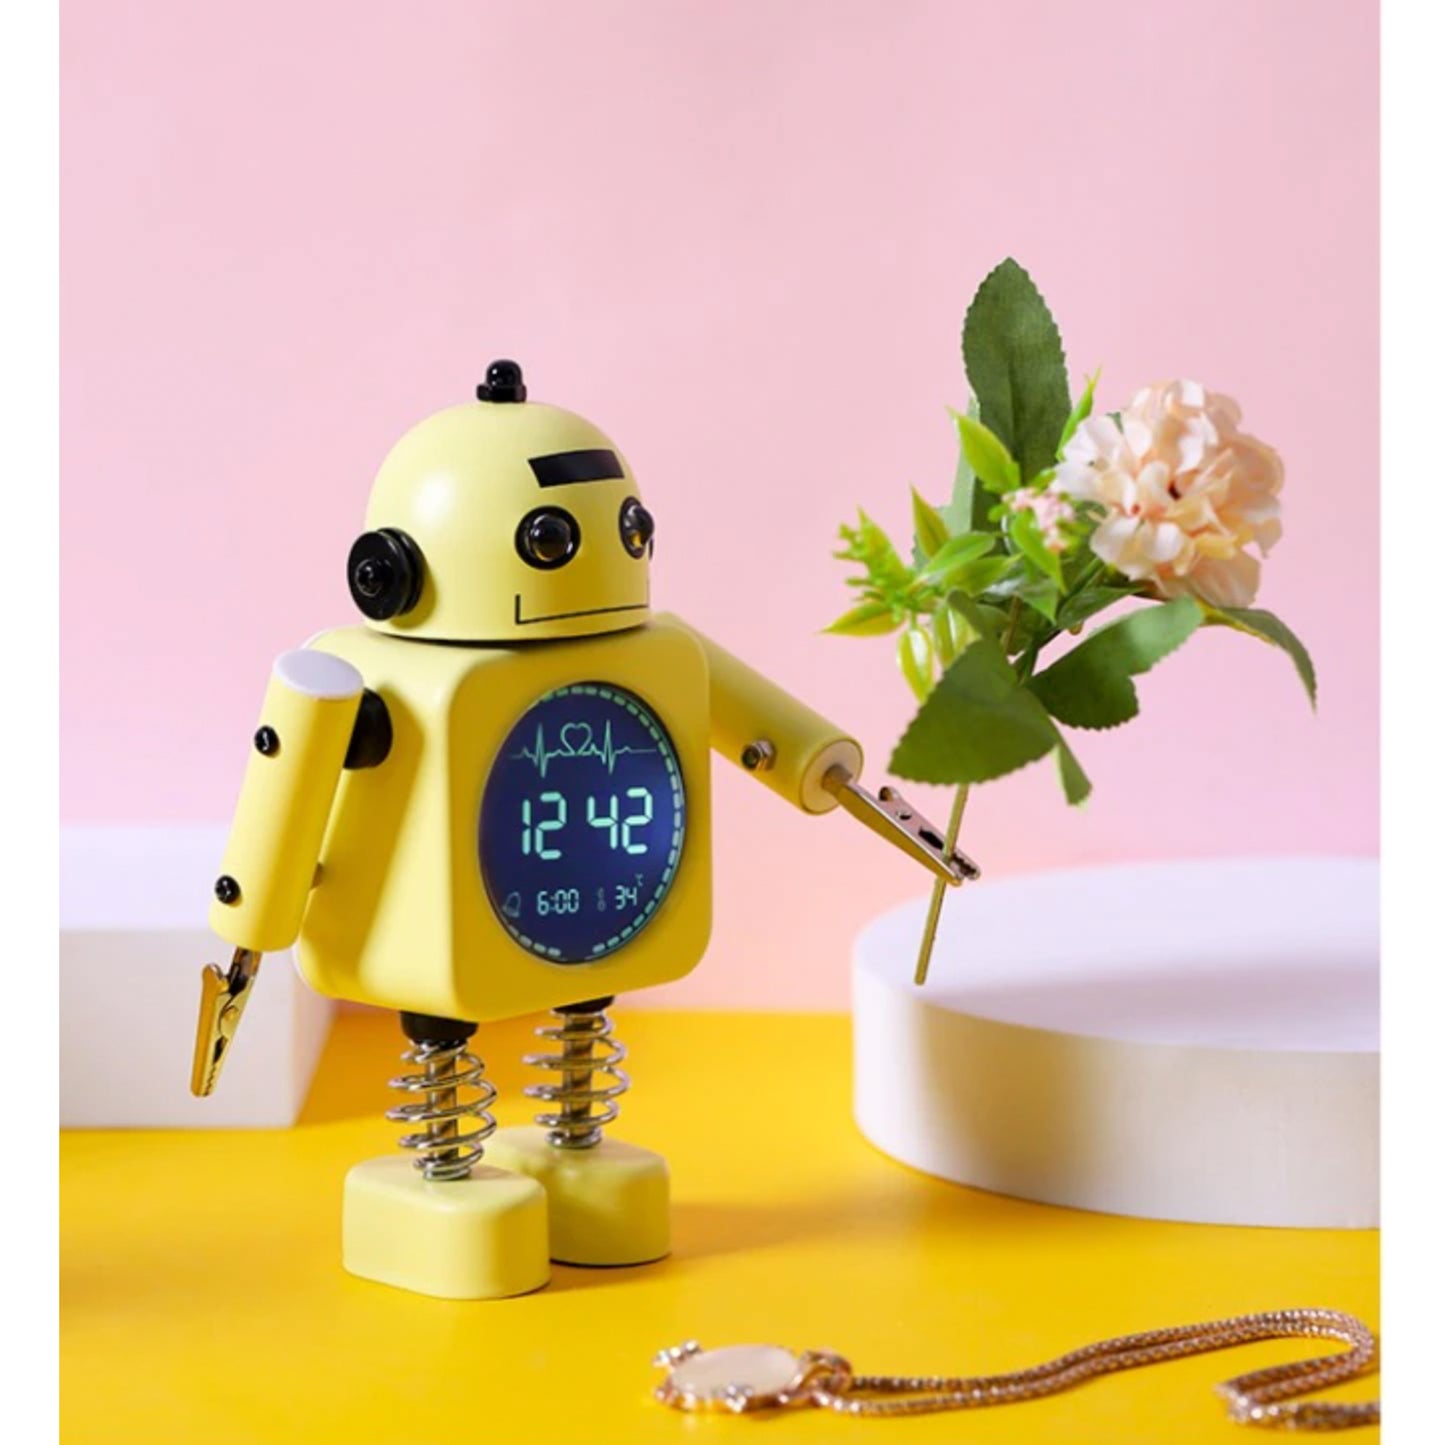 Retro Robot Alarm Clock with Light up Eyes - 5 Colours